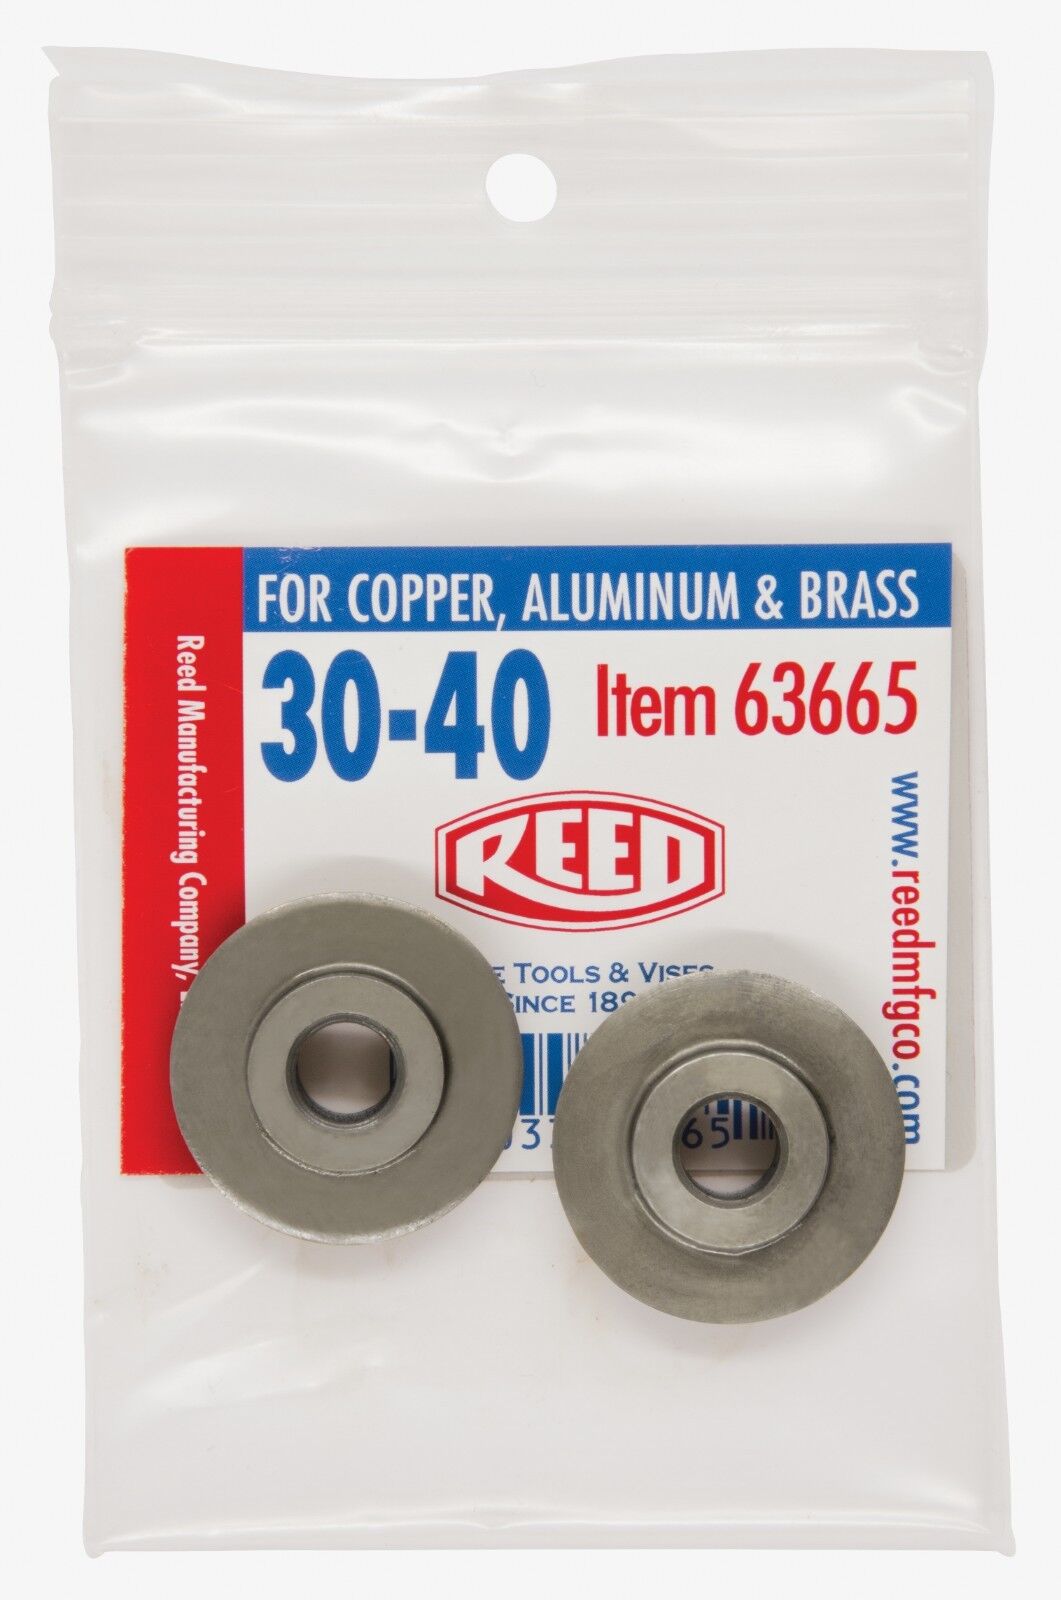 Indefinitely Super Special SALE held Reed Mfg 63665 - 2PK-30-40 Tubing Cutter Alum Copper Wheels for